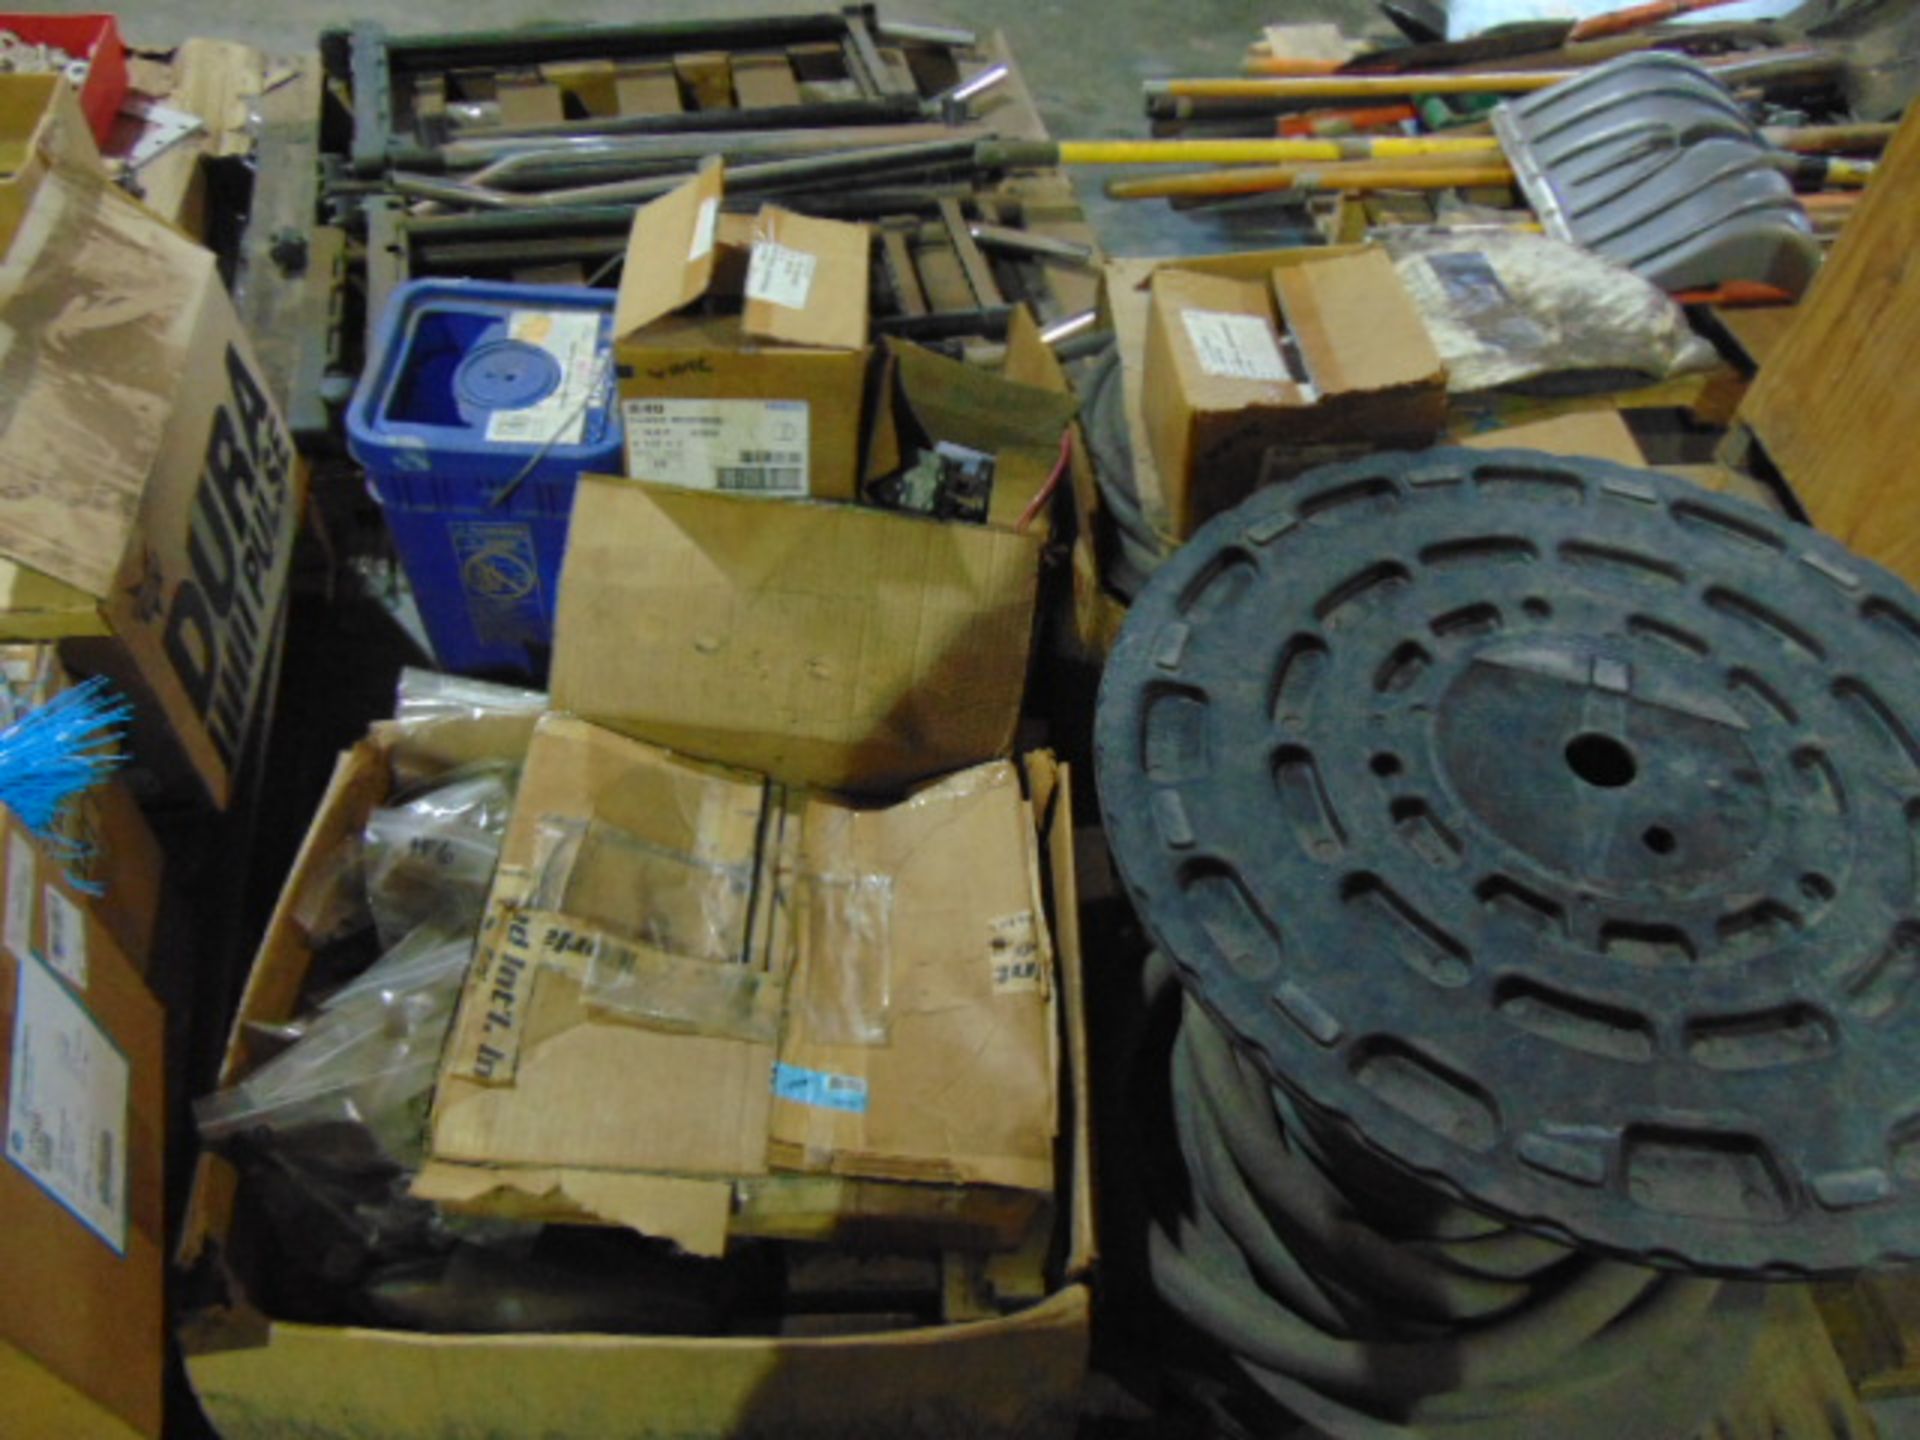 LOT CONSISTING OF: shovels, hardware & misc. (on eight skids) - Image 8 of 9